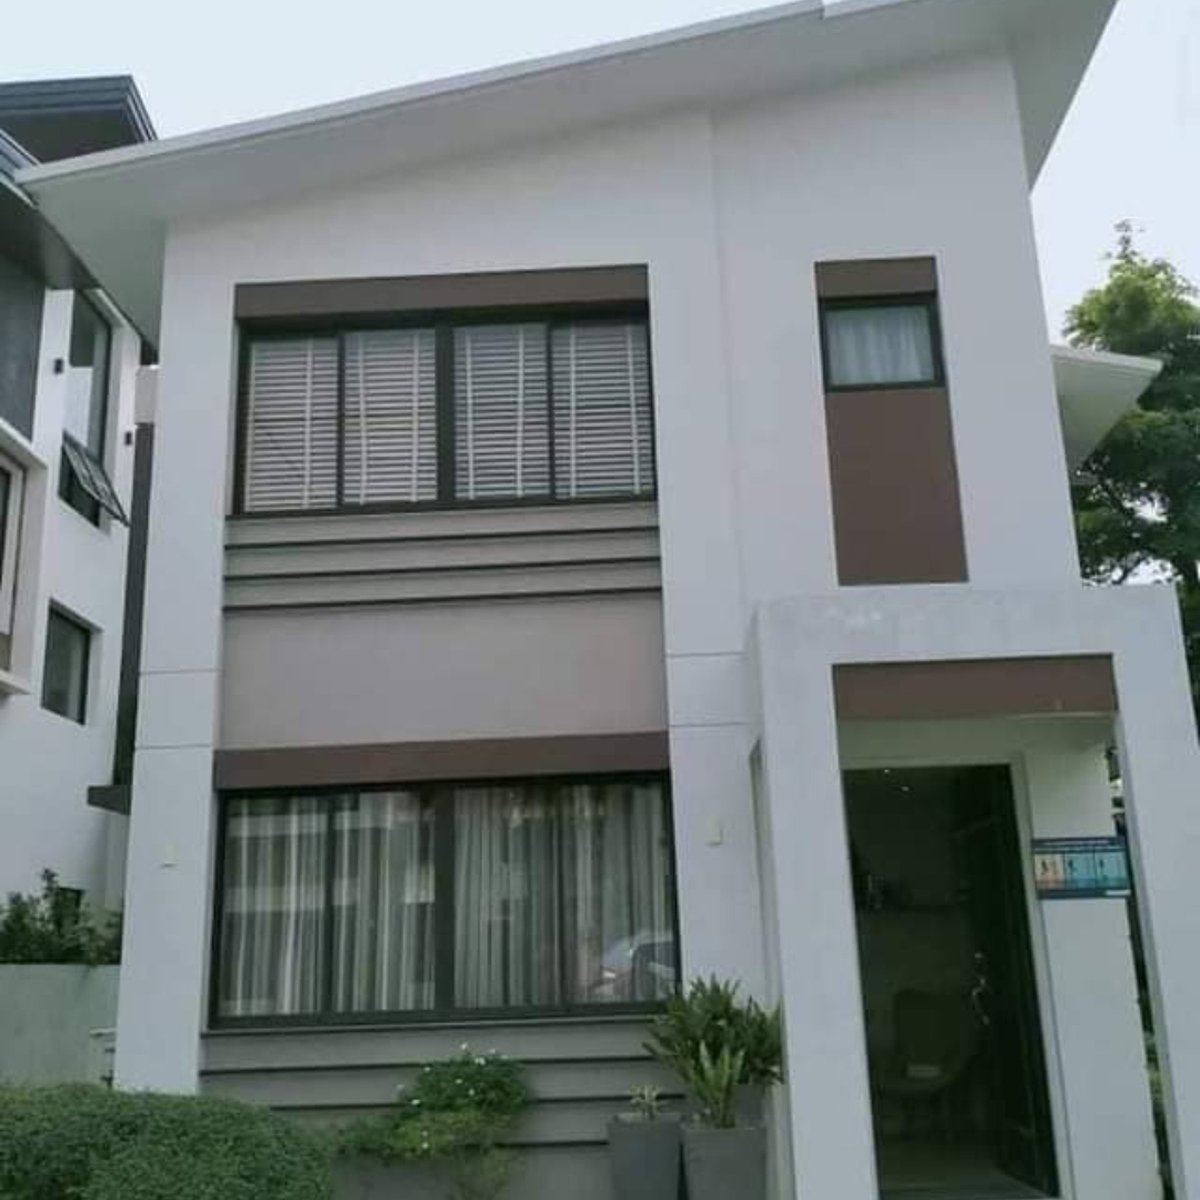 4-bedroom Duplex / Twin House For Sale in Cainta Rizal